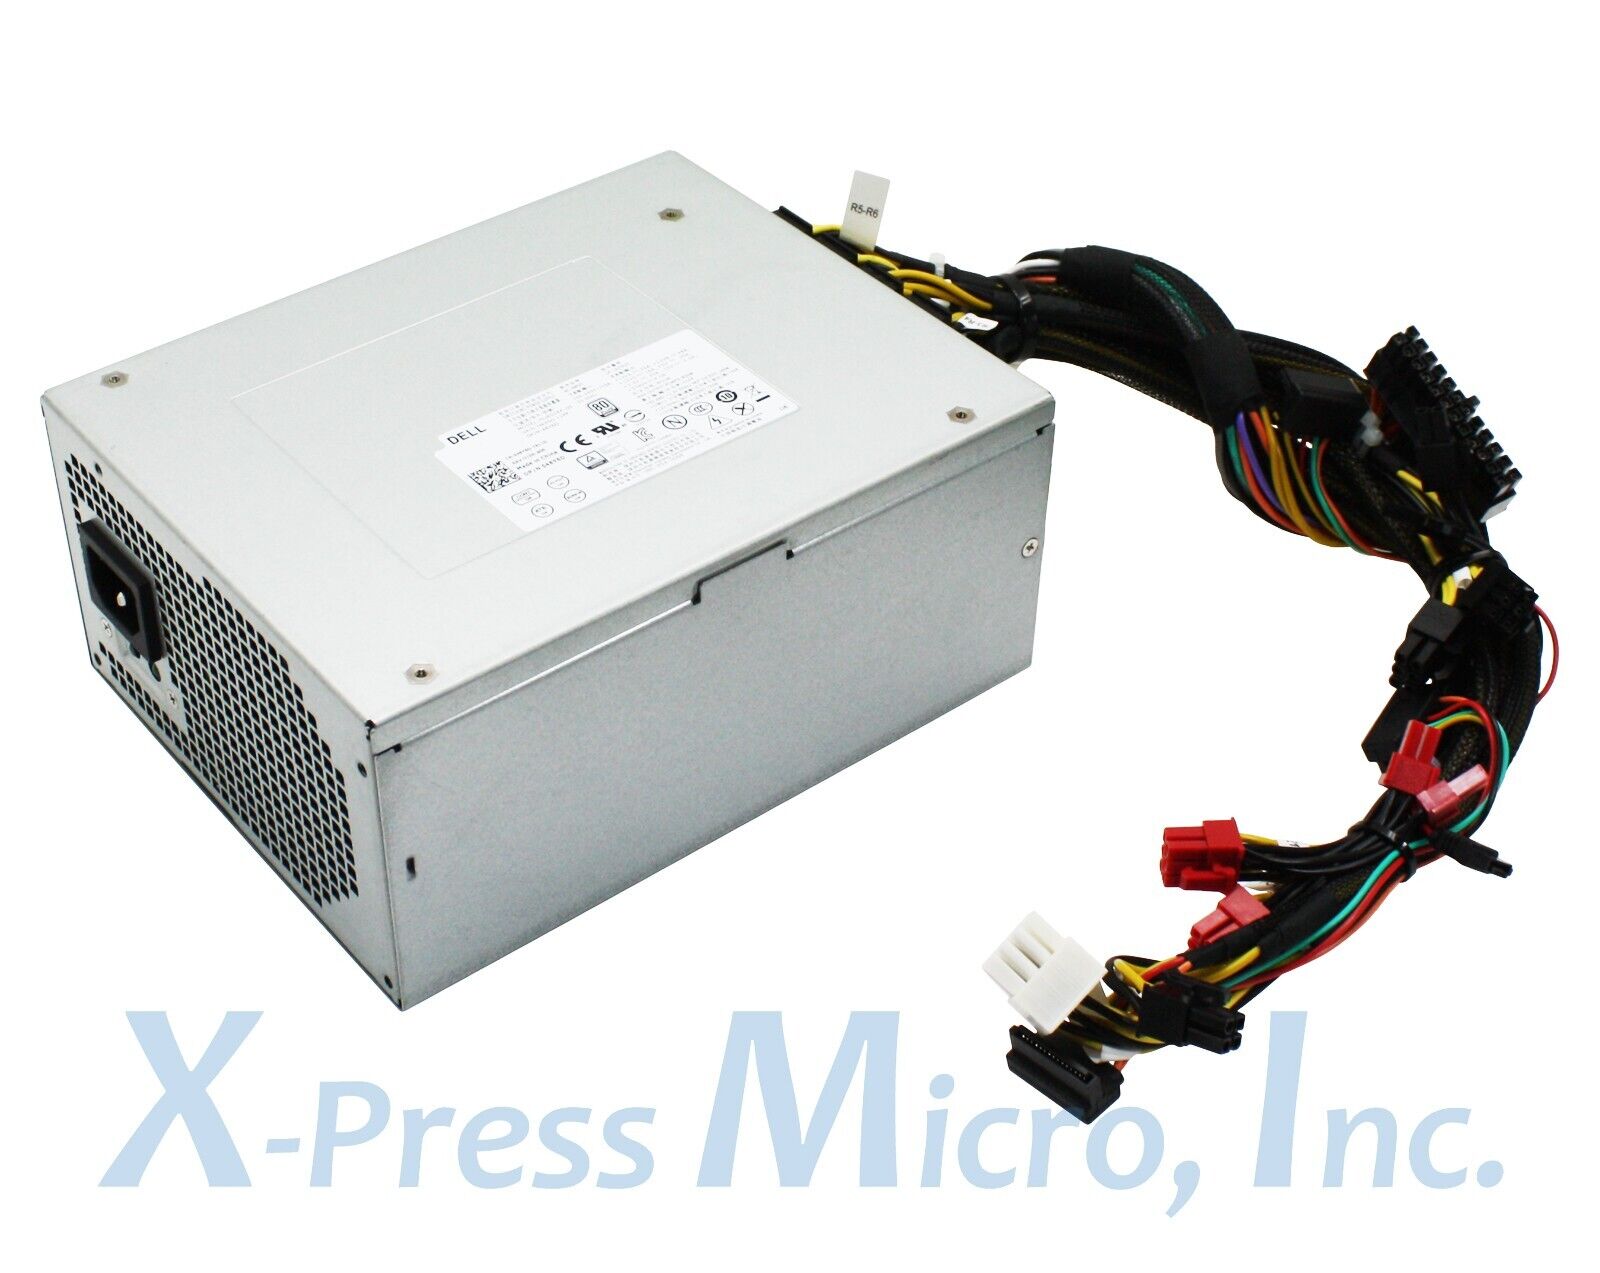 Dell Alienware Aurora R5 R6 R7 R8 R9 850W Power Supply 9XG5C With Cables